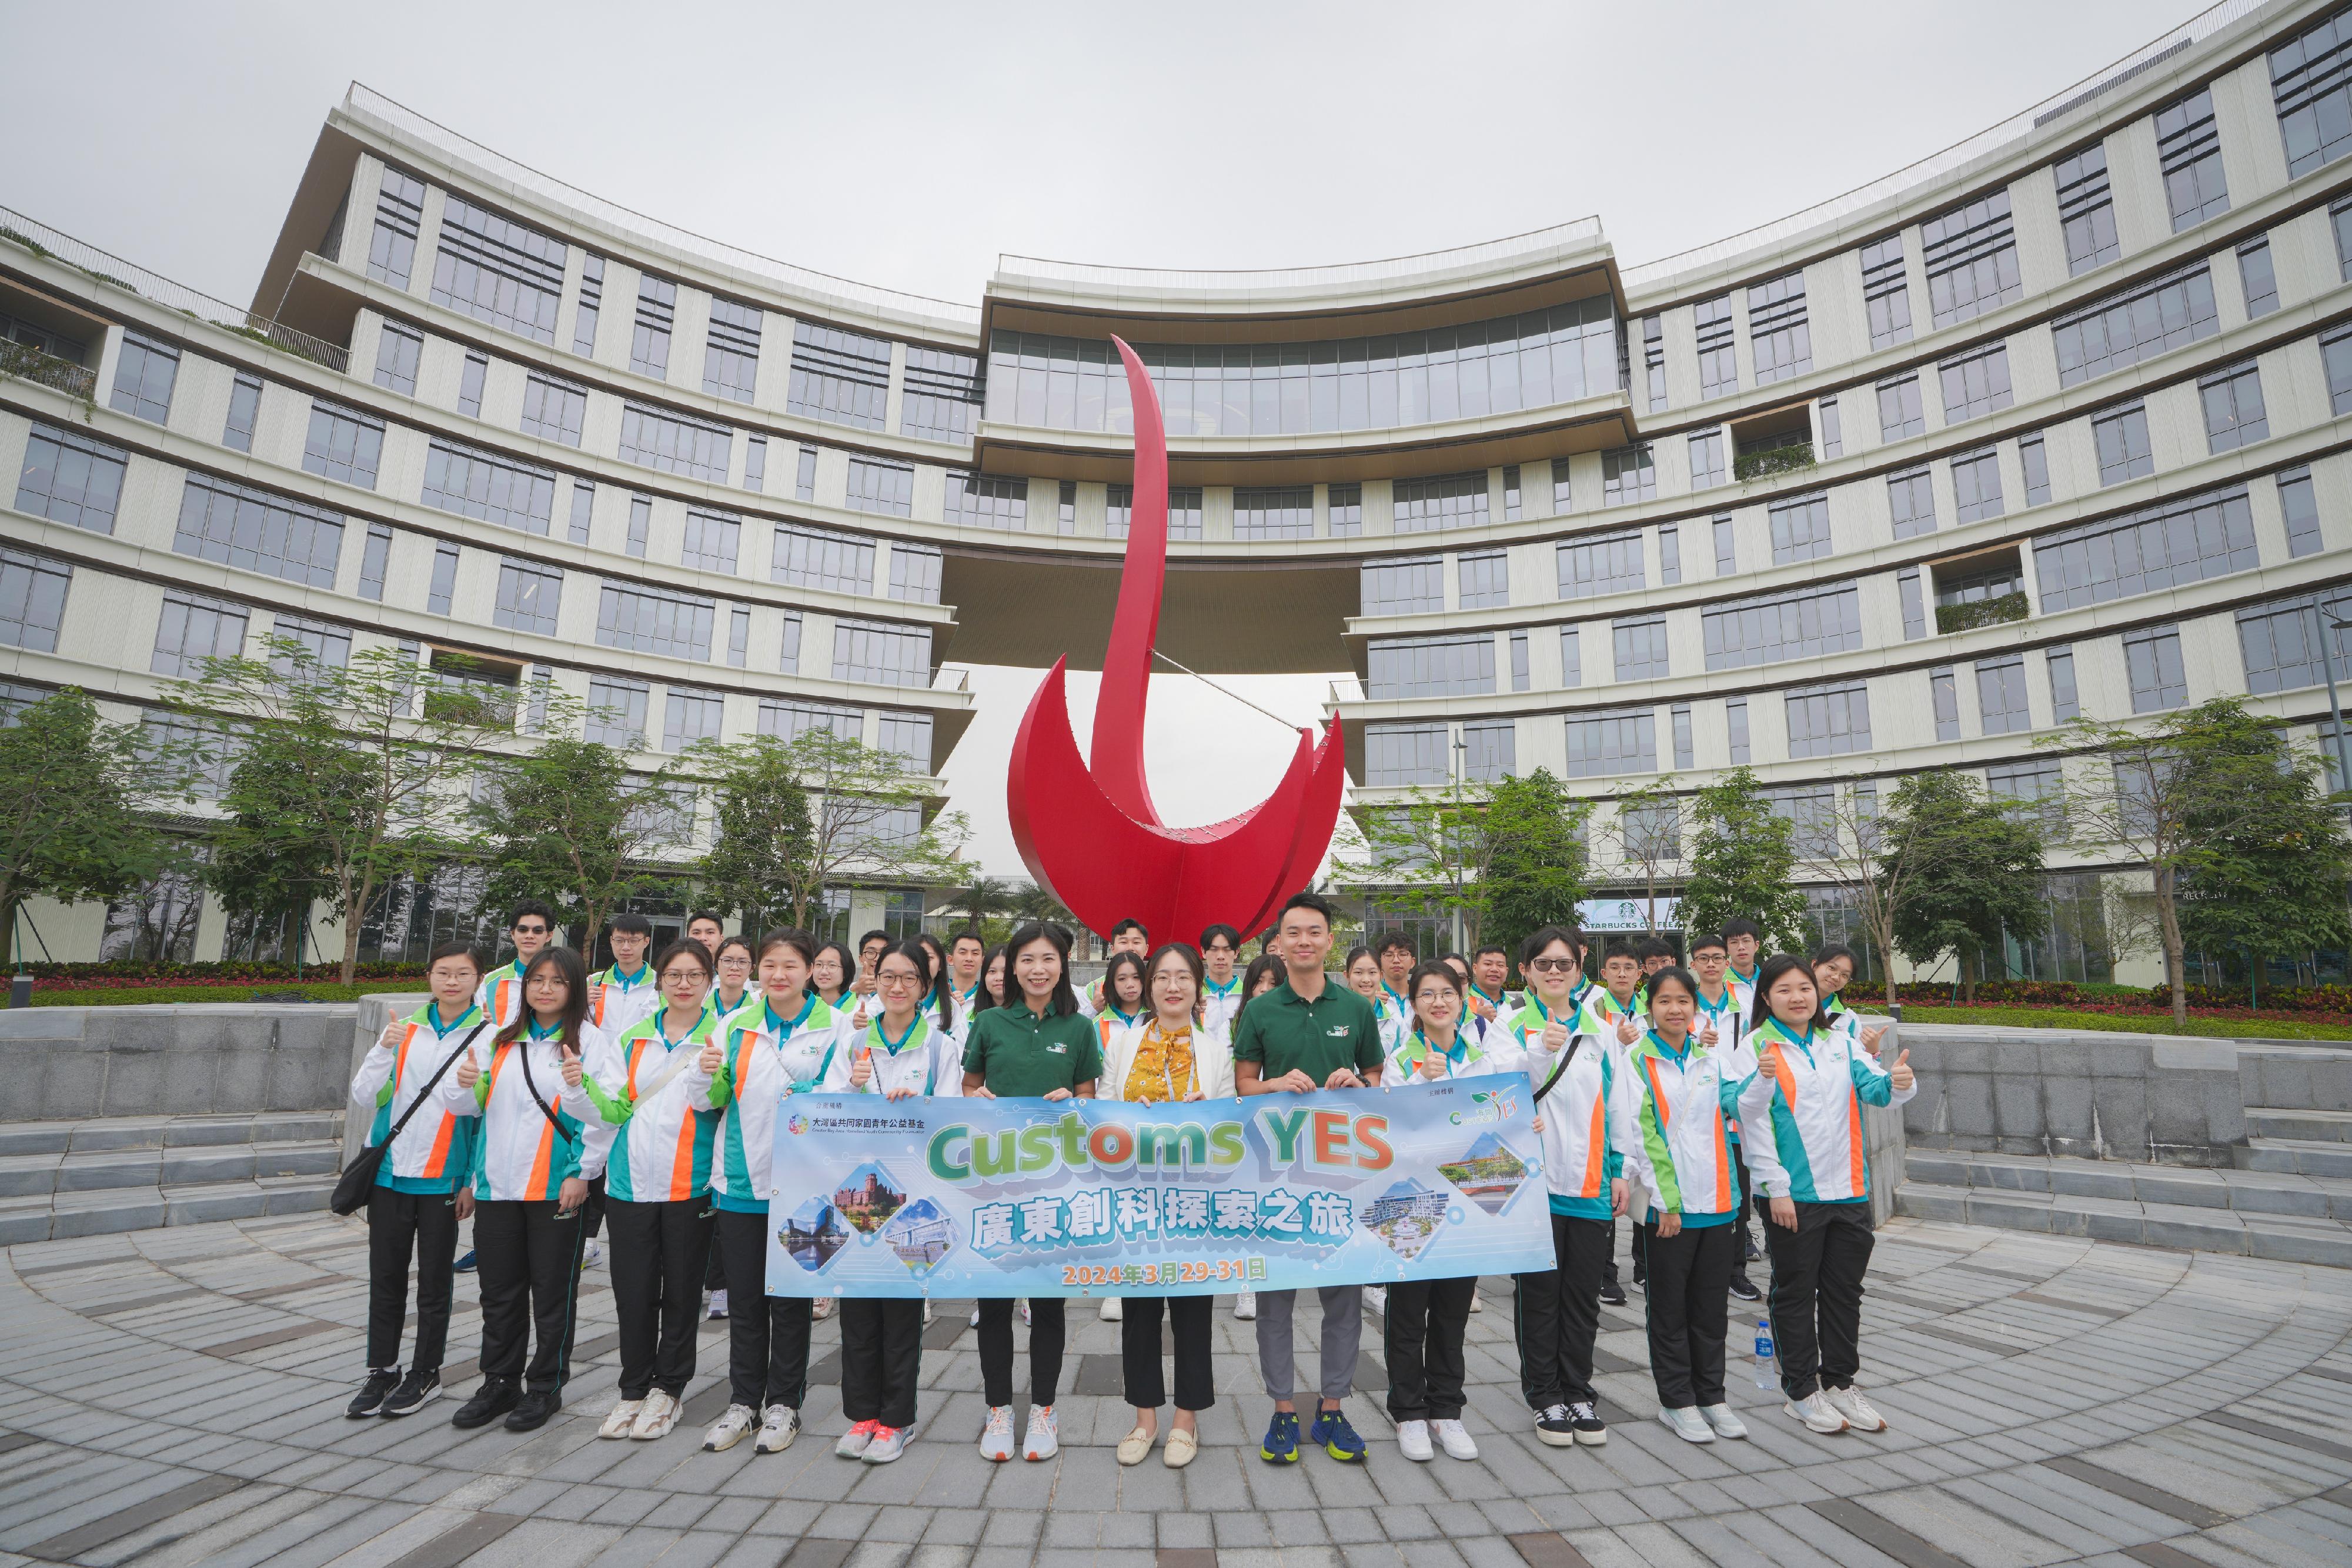 From March 29 to 31, "Customs YES" co-organised the Guangdong Innovation and Technology Exploration Trip with the Greater Bay Area Homeland Youth Community Foundation. Photo shows "Customs YES" members taking a group photo at the Hong Kong University of Science and Technology (Guangzhou) in Nansha.